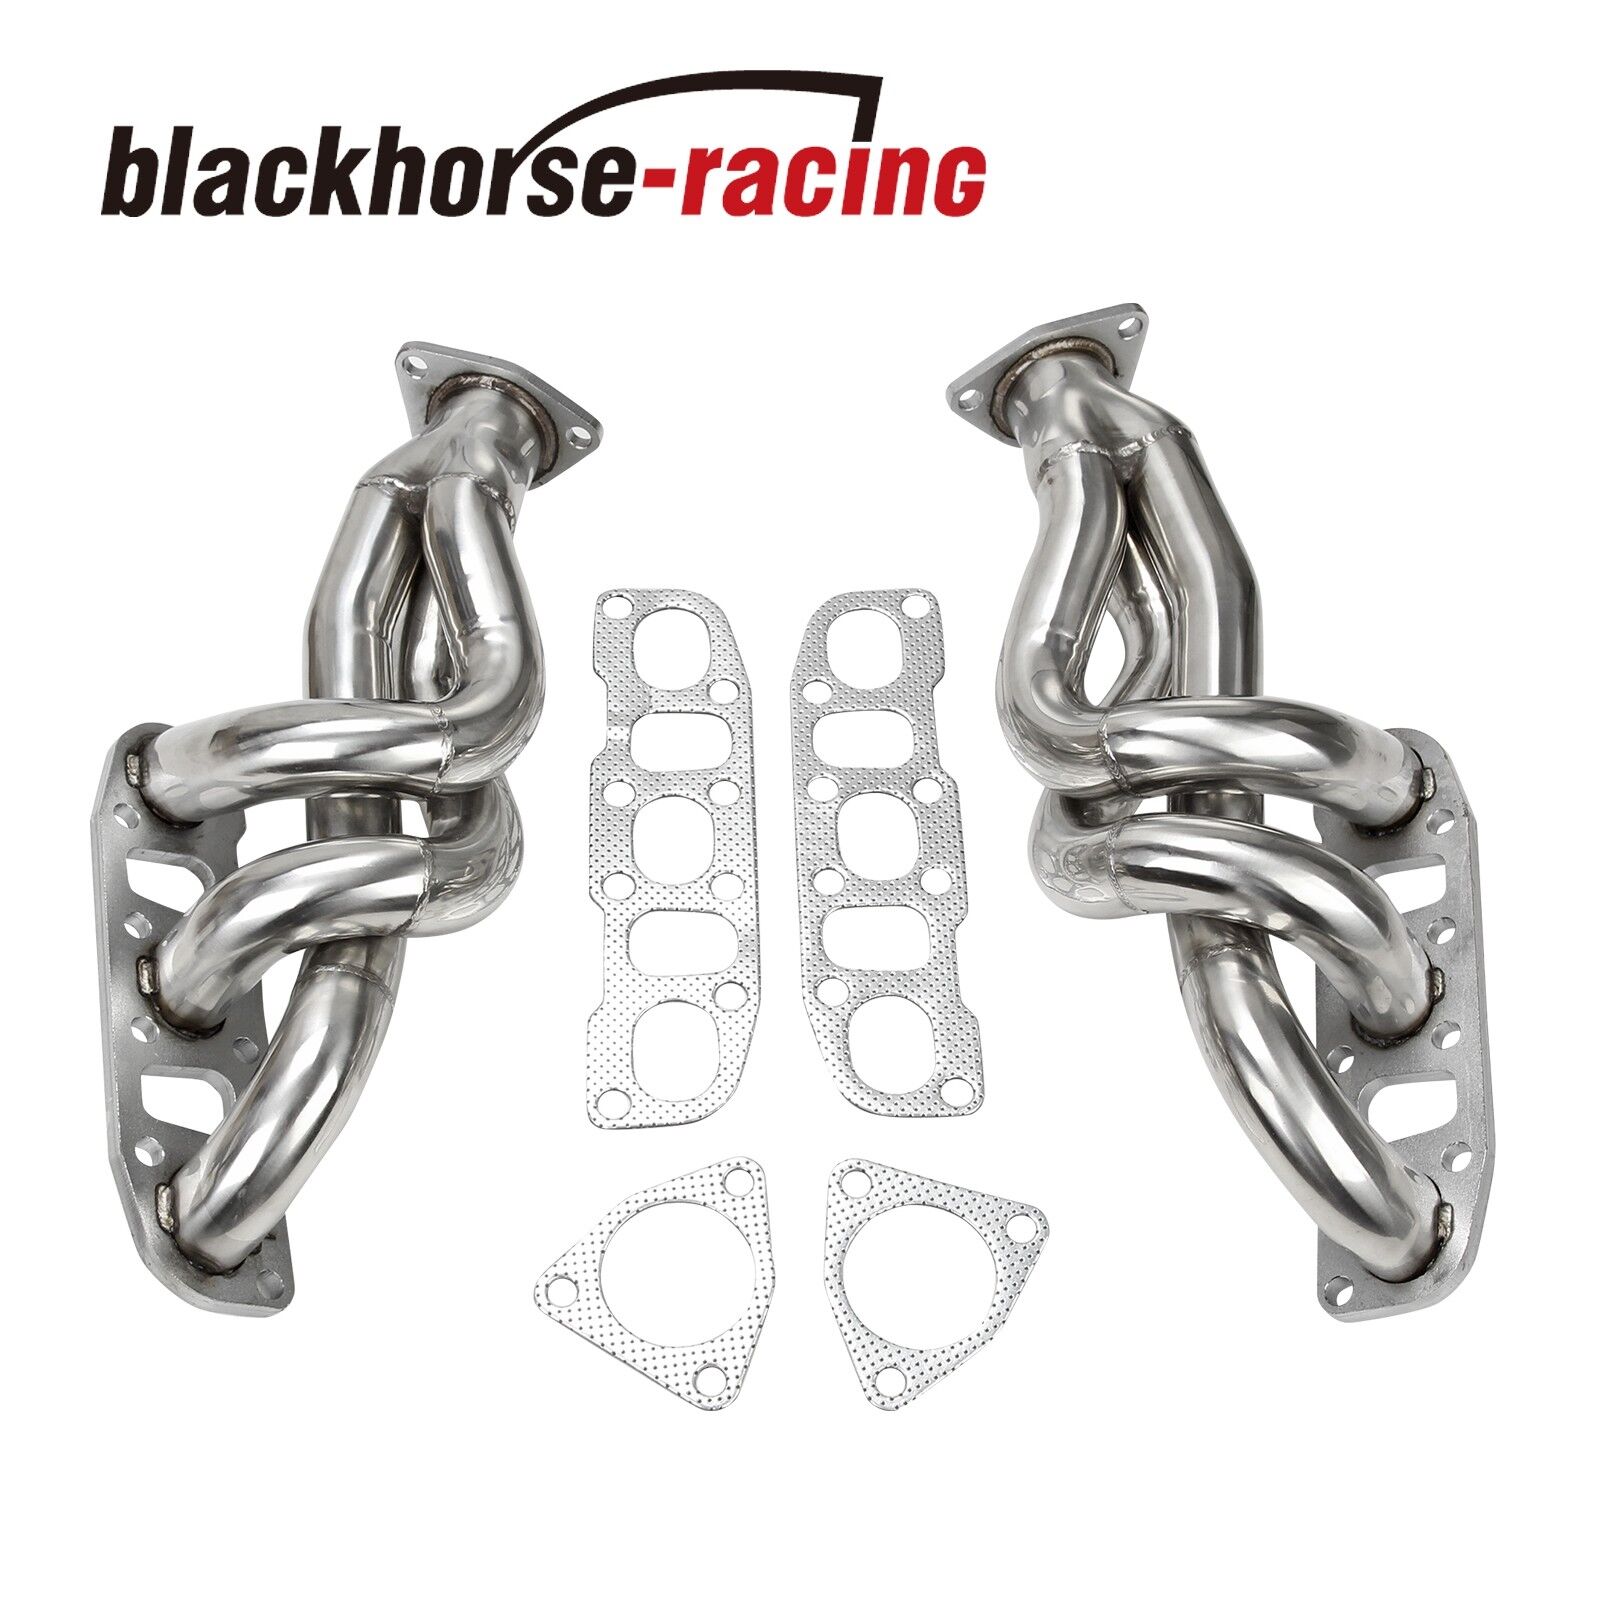 STAINLESS STEEL RACE MANIFOLD HEADER/EXHAUST FITS FOR 350Z G35 VQ35DE 2003-2006